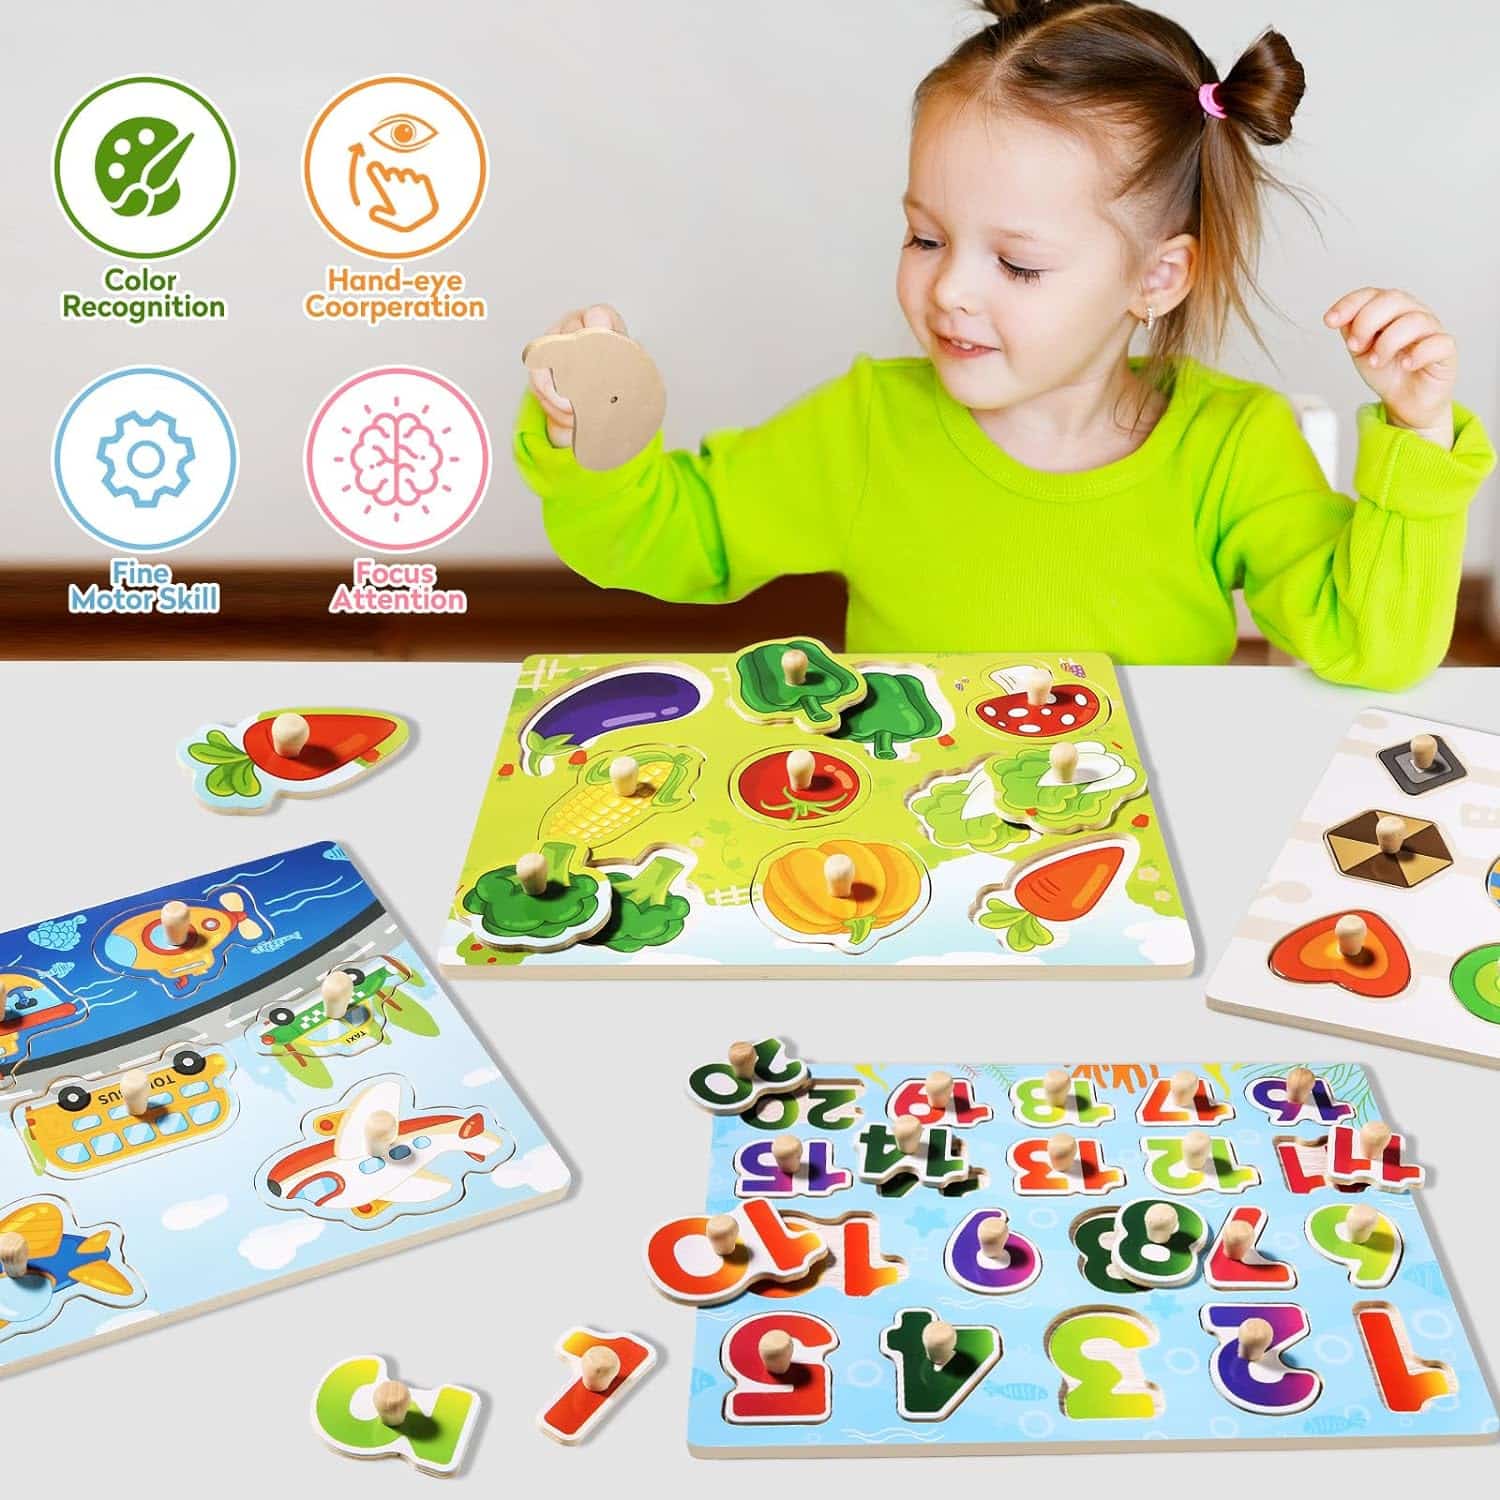 Wooden Puzzles for Toddlers 1-3: A Fun and Educational Toy Review